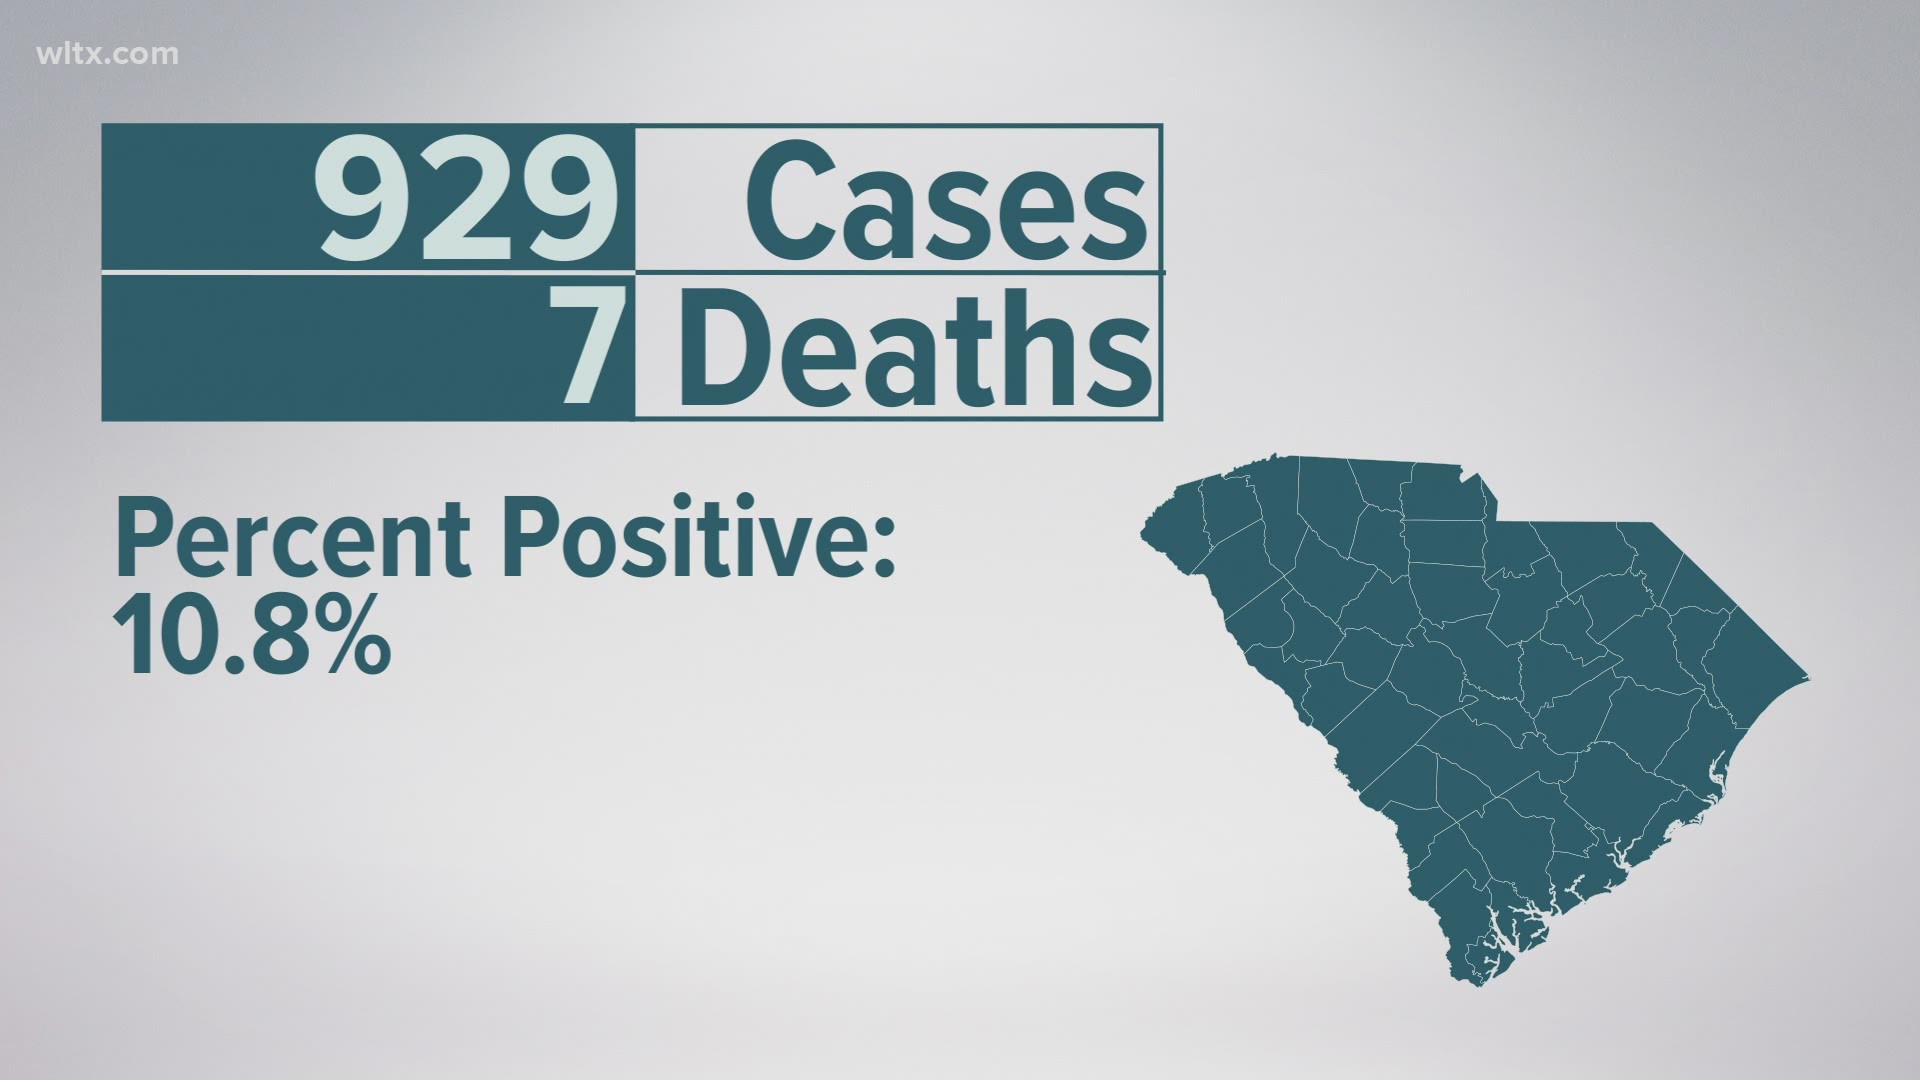 Currently 929 cases and 7 deaths, the percent positive is 10.8.